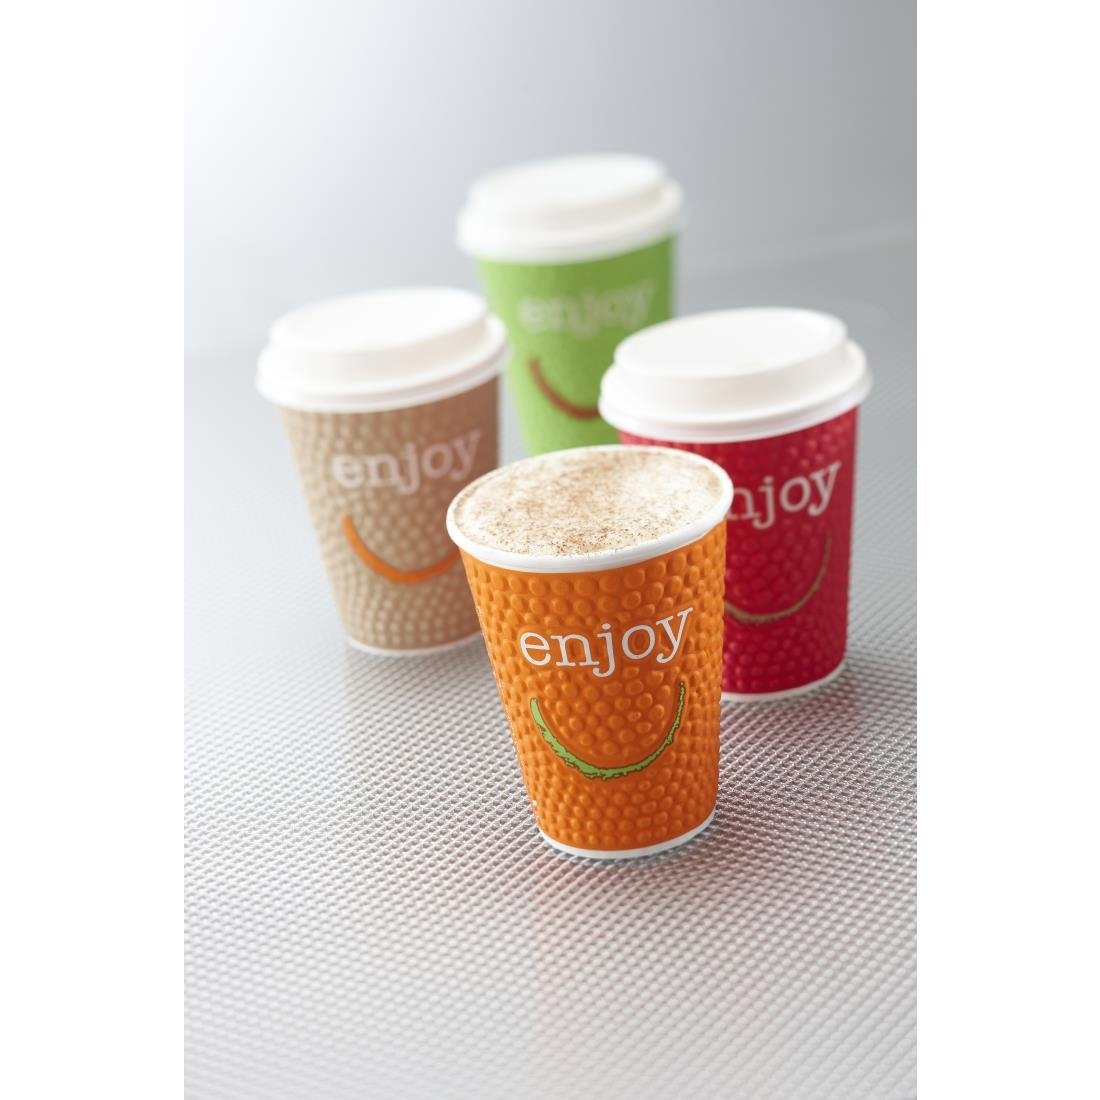 Huhtamaki Enjoy Double Wall Disposable Hot Cups 340ml / 12oz (Pack of 680) JD Catering Equipment Solutions Ltd